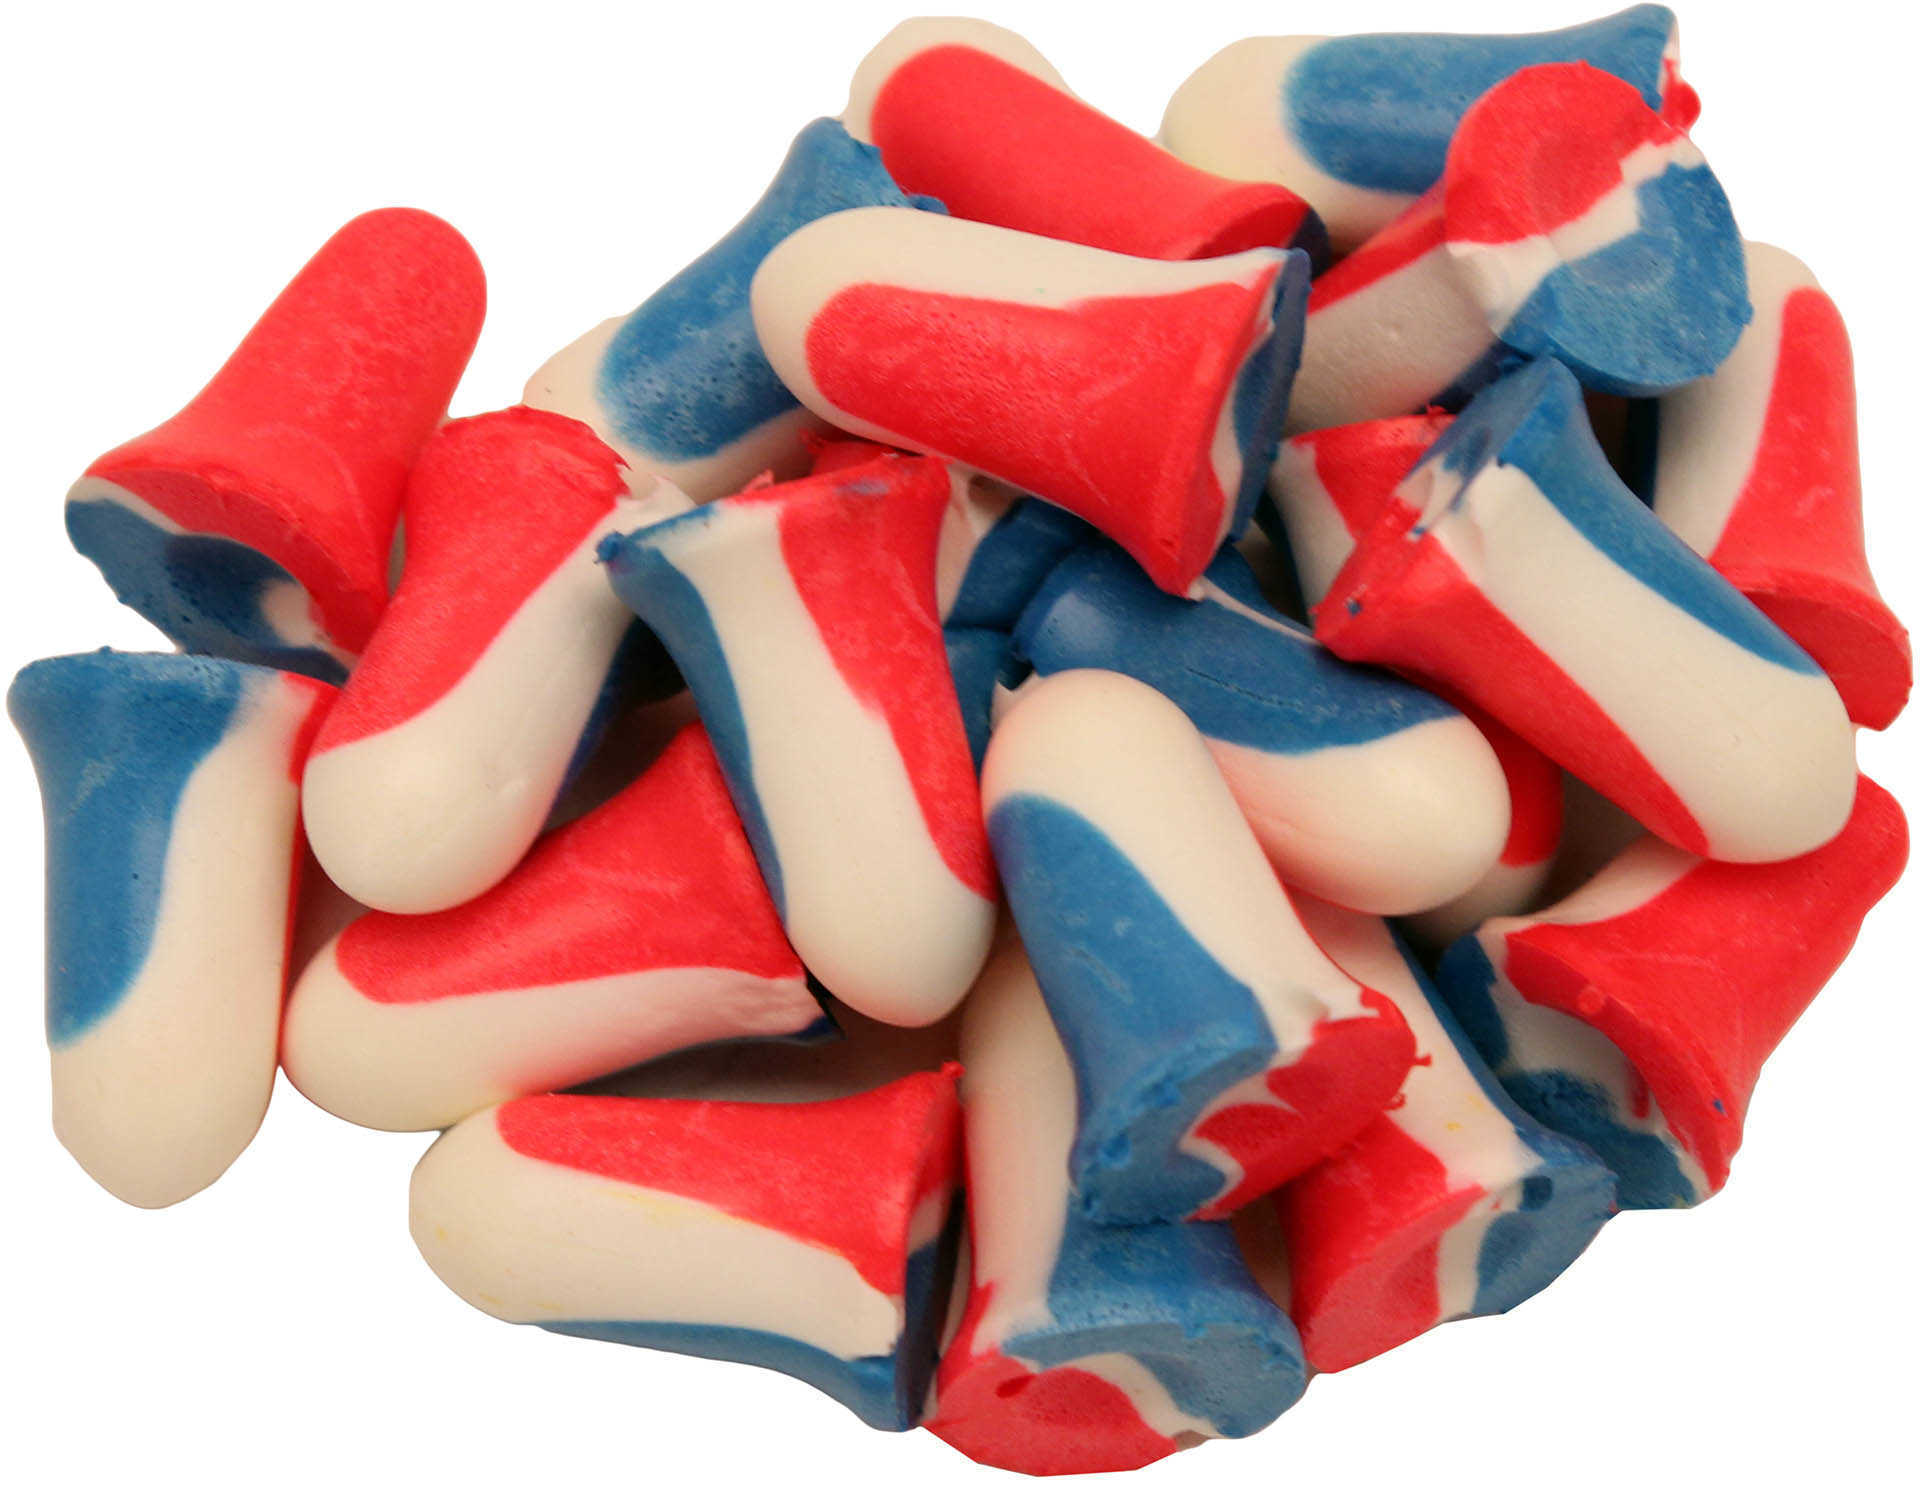 Howard Leight Super Ear Plugs Foam NRR 33 Uncorded Red/White/Blue 10 Pair R-01891